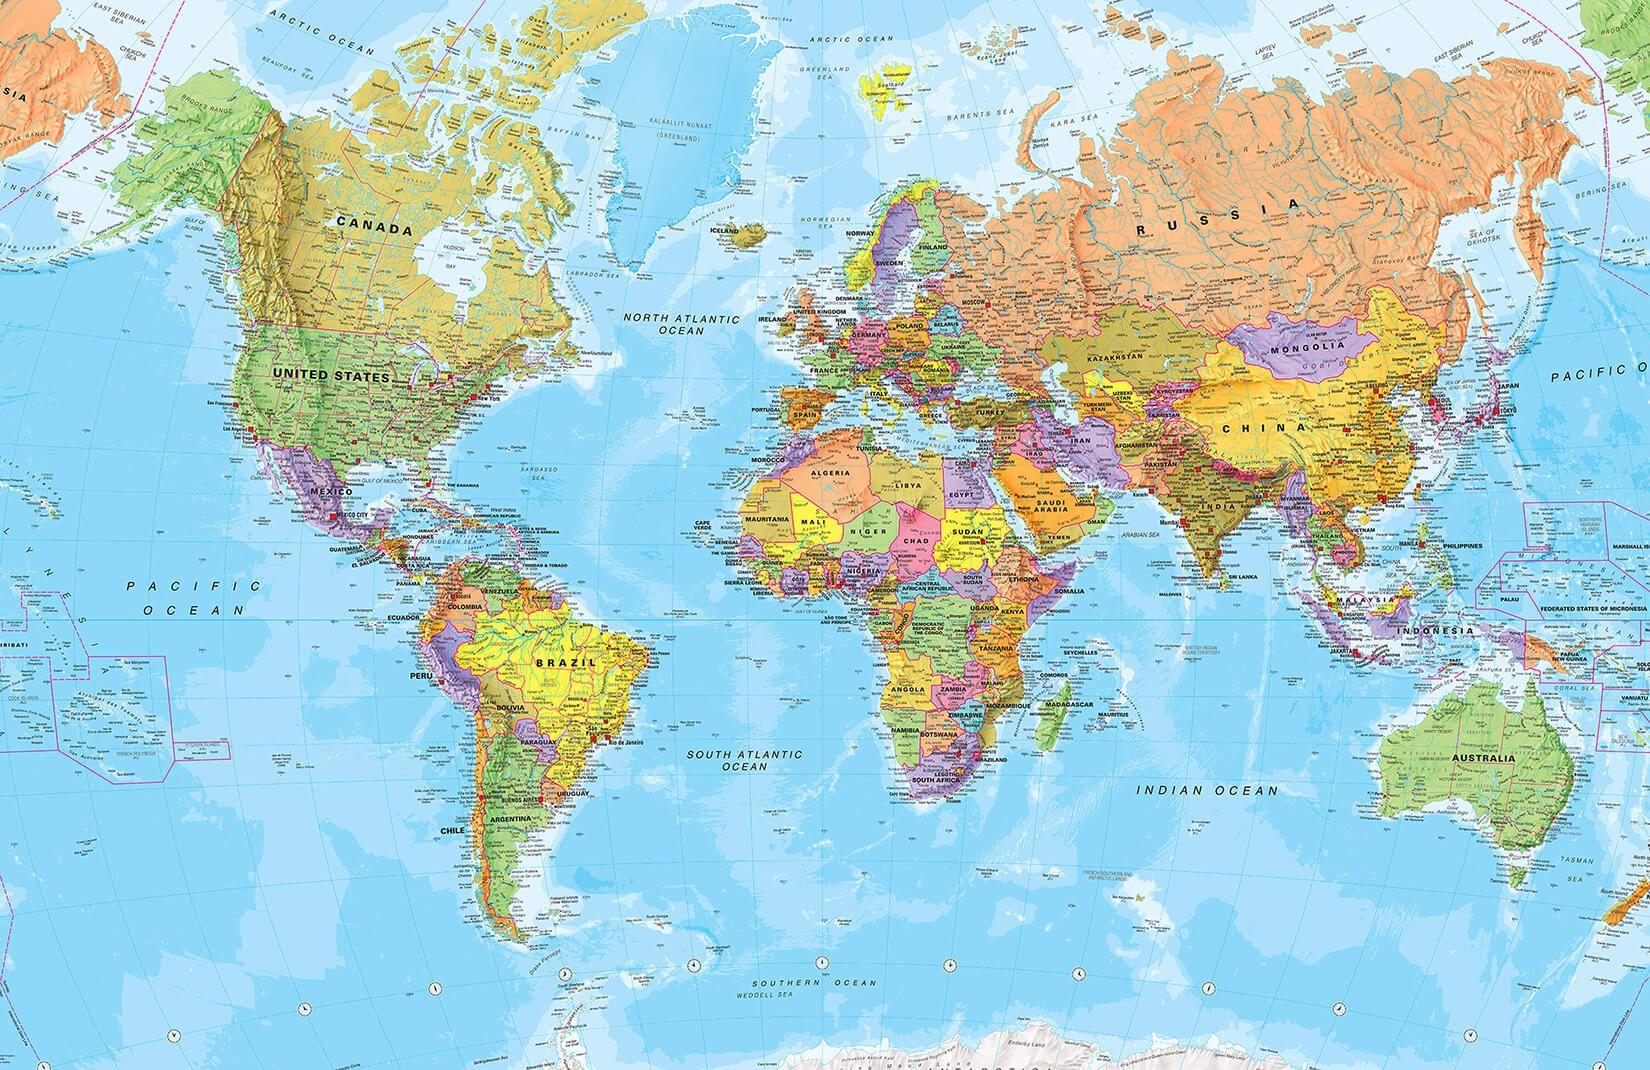 World Political Map Hd Images Free Download - kulturaupice